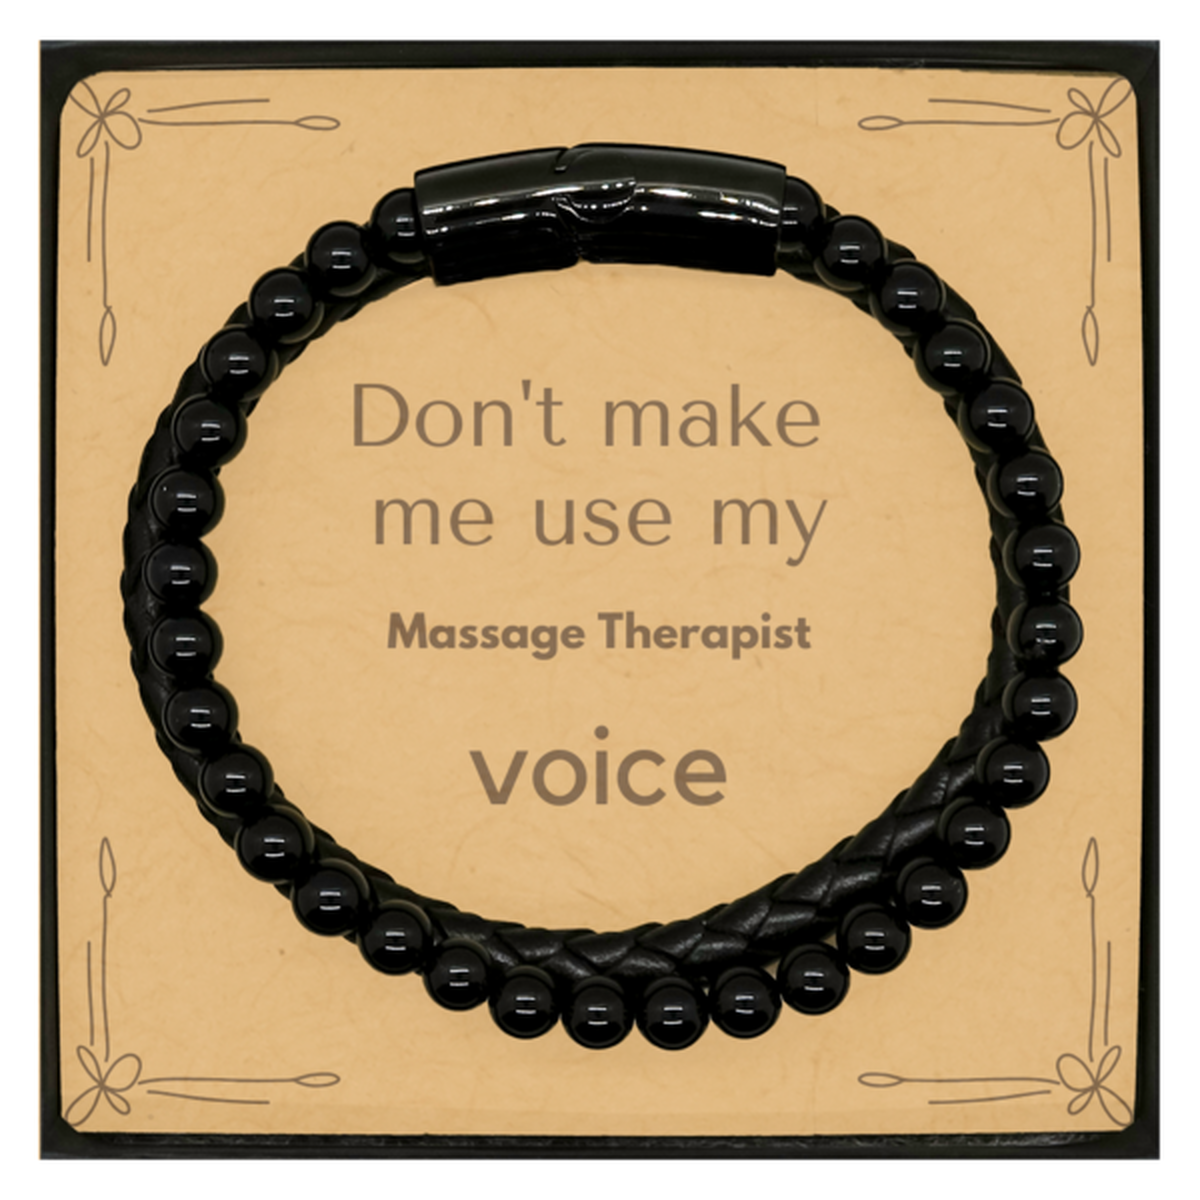 Don't make me use my Massage Therapist voice, Sarcasm Massage Therapist Card Gifts, Christmas Massage Therapist Stone Leather Bracelets Birthday Unique Gifts For Massage Therapist Coworkers, Men, Women, Colleague, Friends